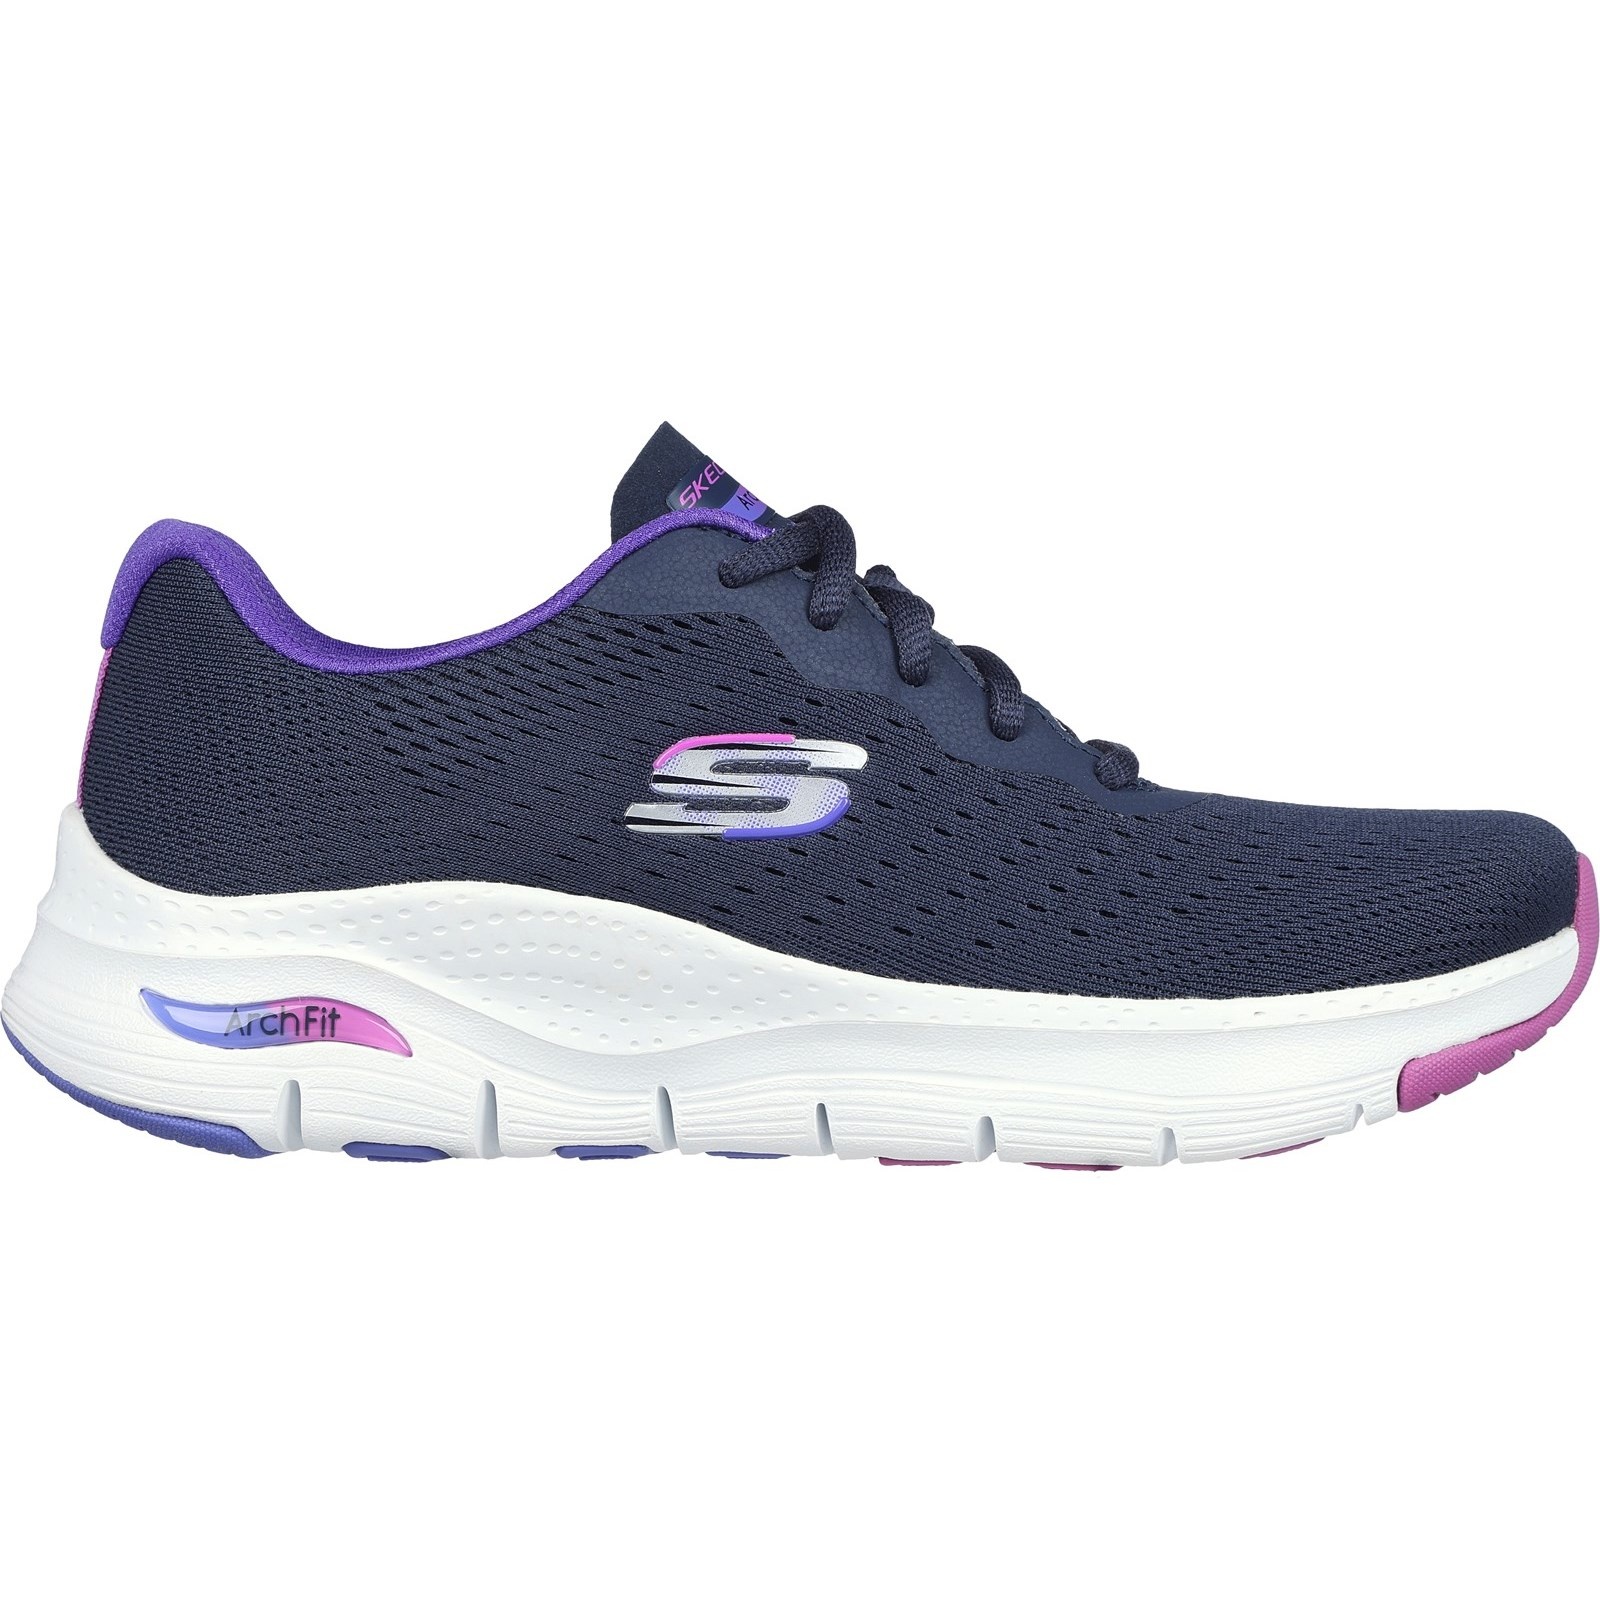 Skechers Arch Fit Infinity Cool Navy/Purple